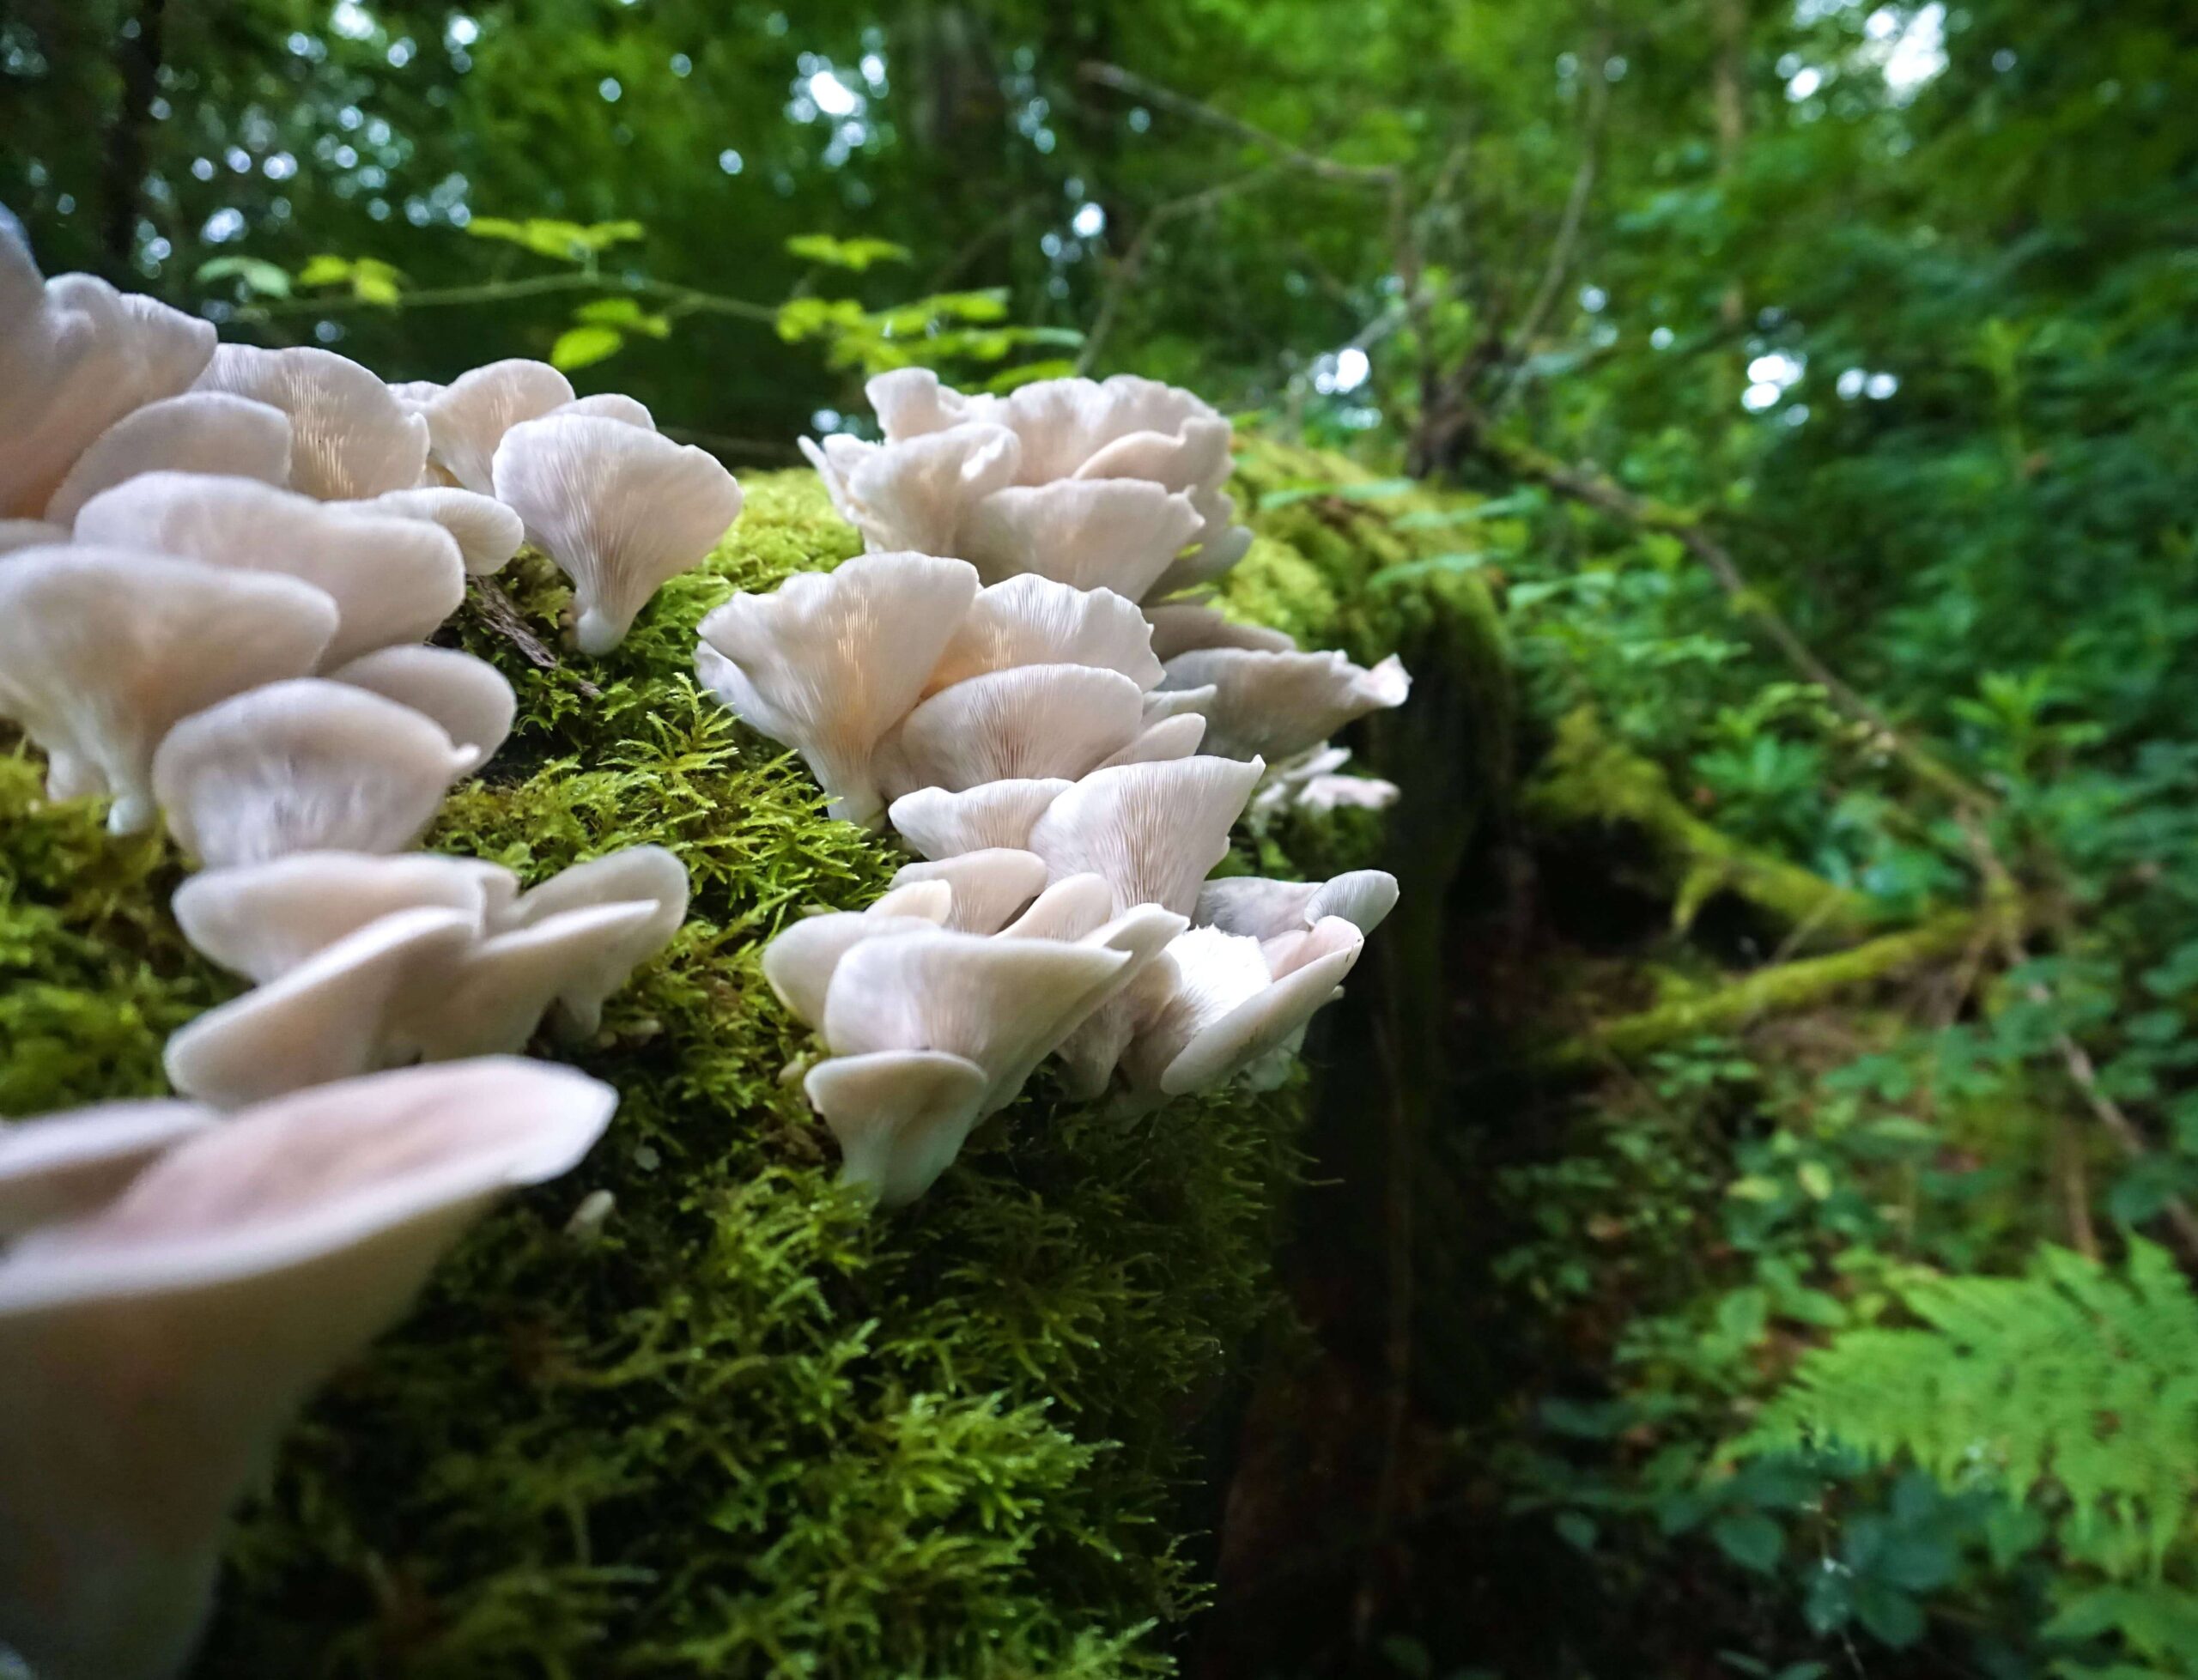 oyster mushrooms outdoors growing on a tree in the woods